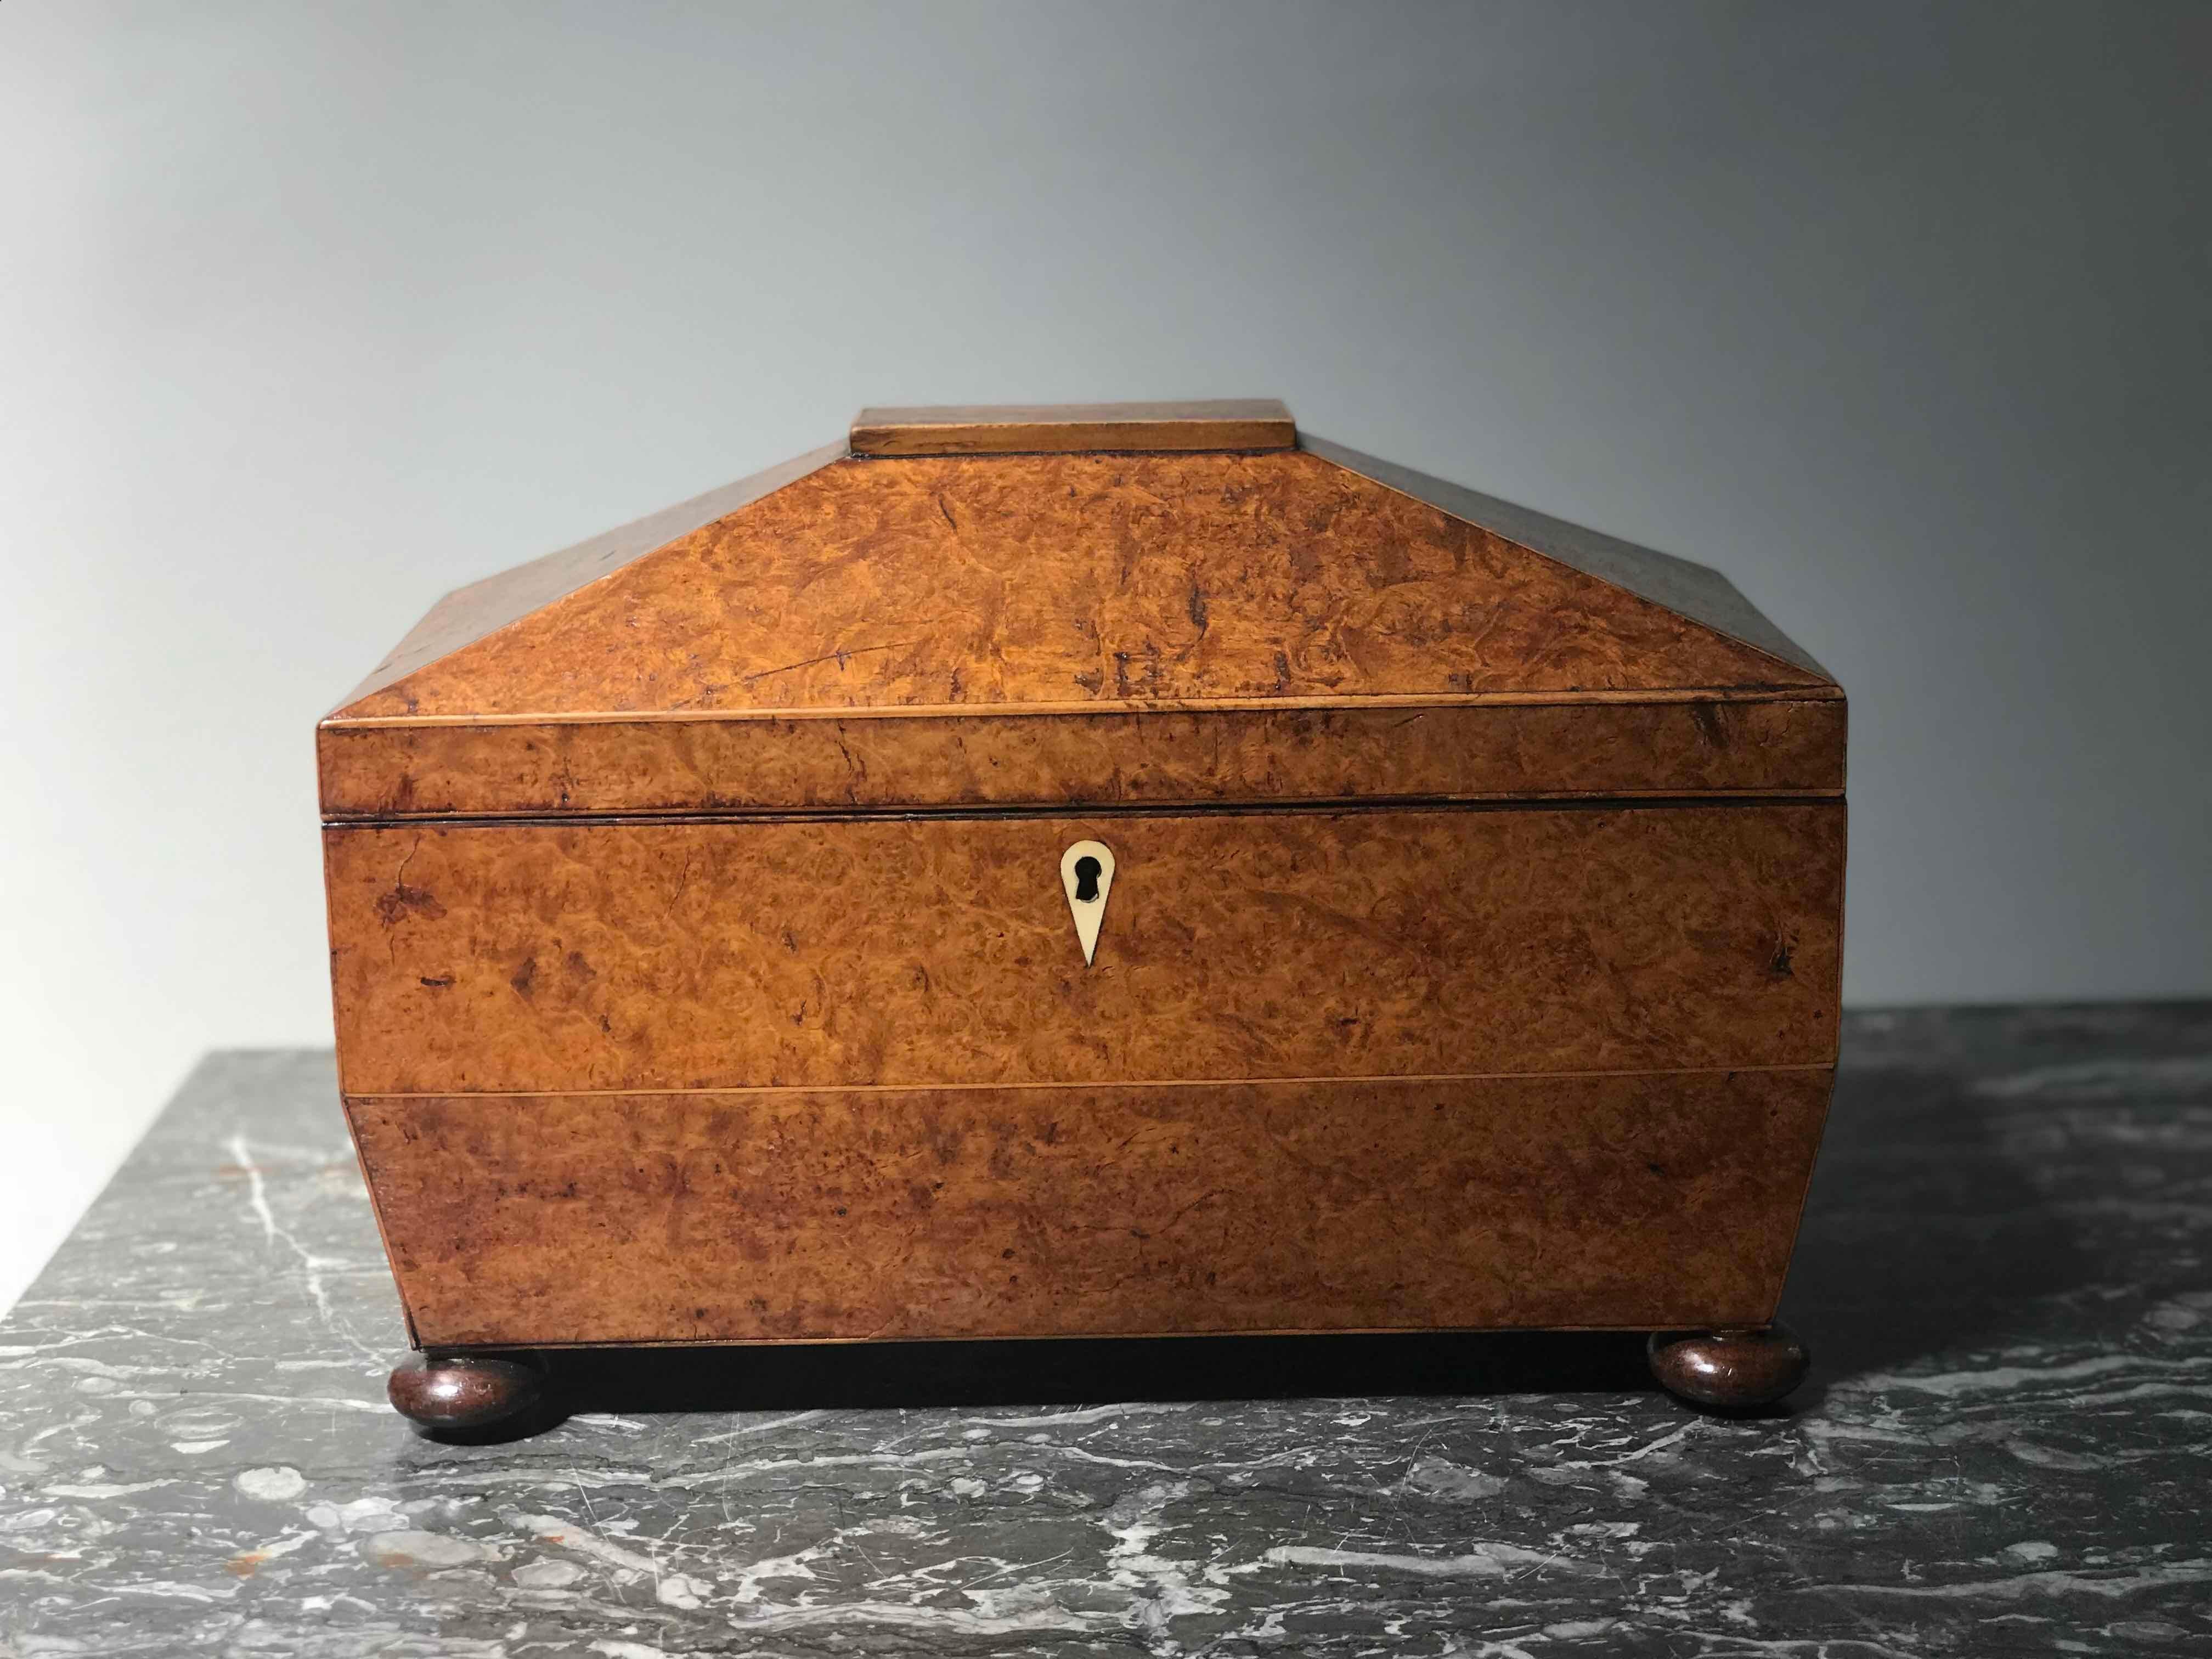 1880s large yew wood English tea caddy with round feet and three compartments. Two rectangular compartments with knobbed lids and one circular compartment with round glass. 